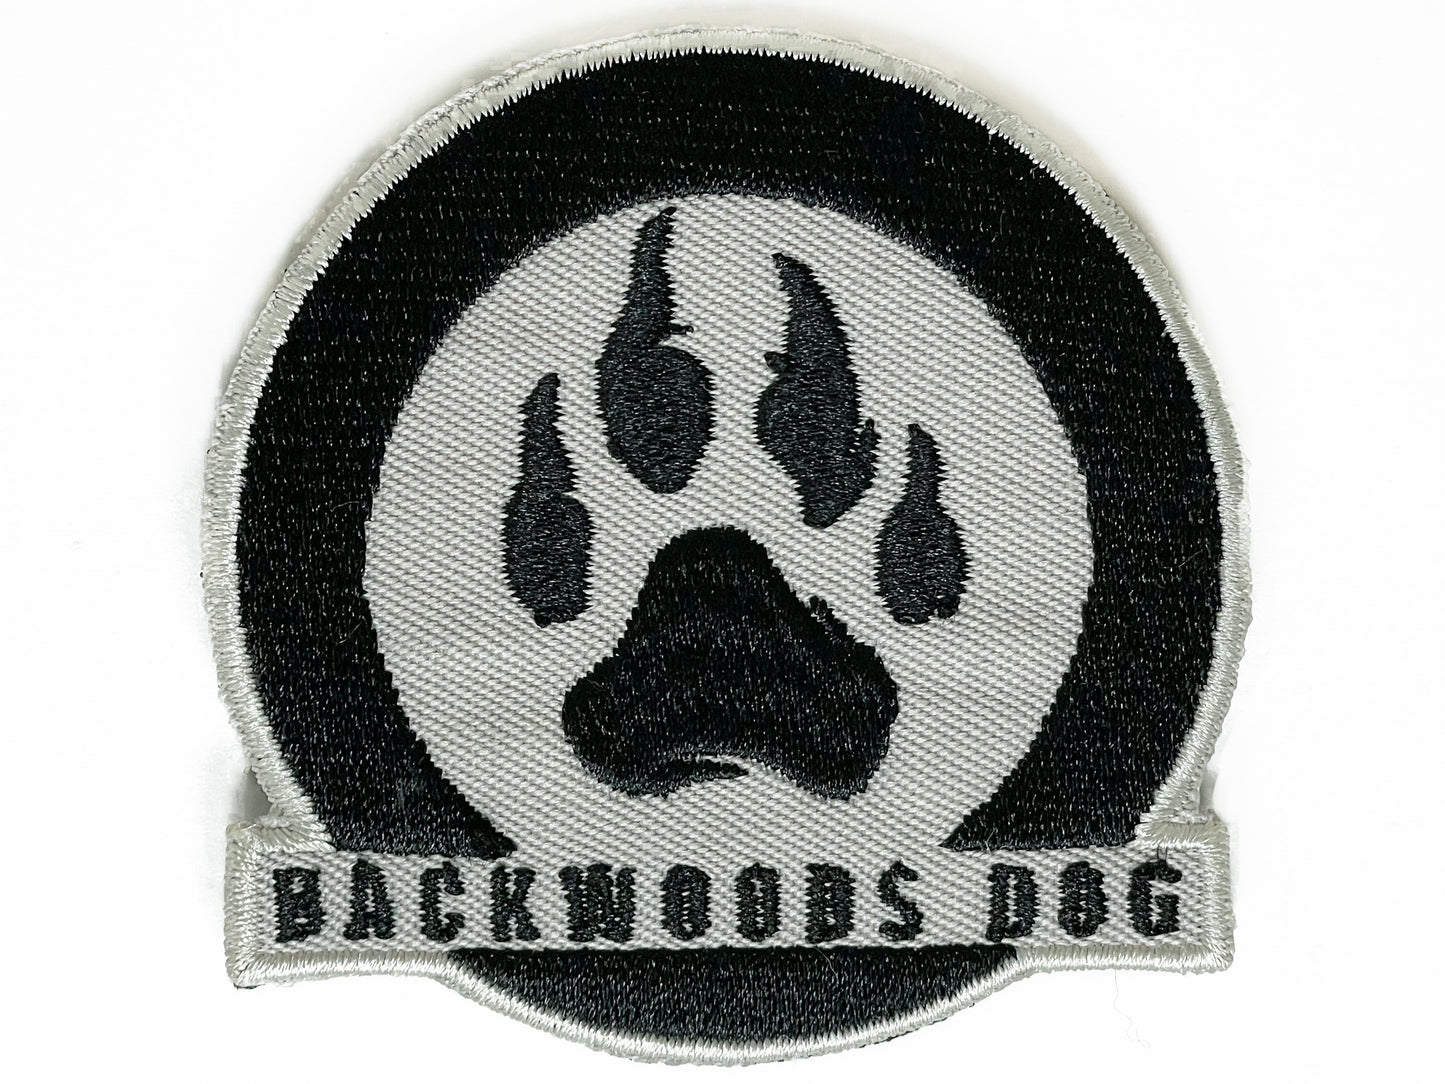 Backwoods Dog Embroidered Patch